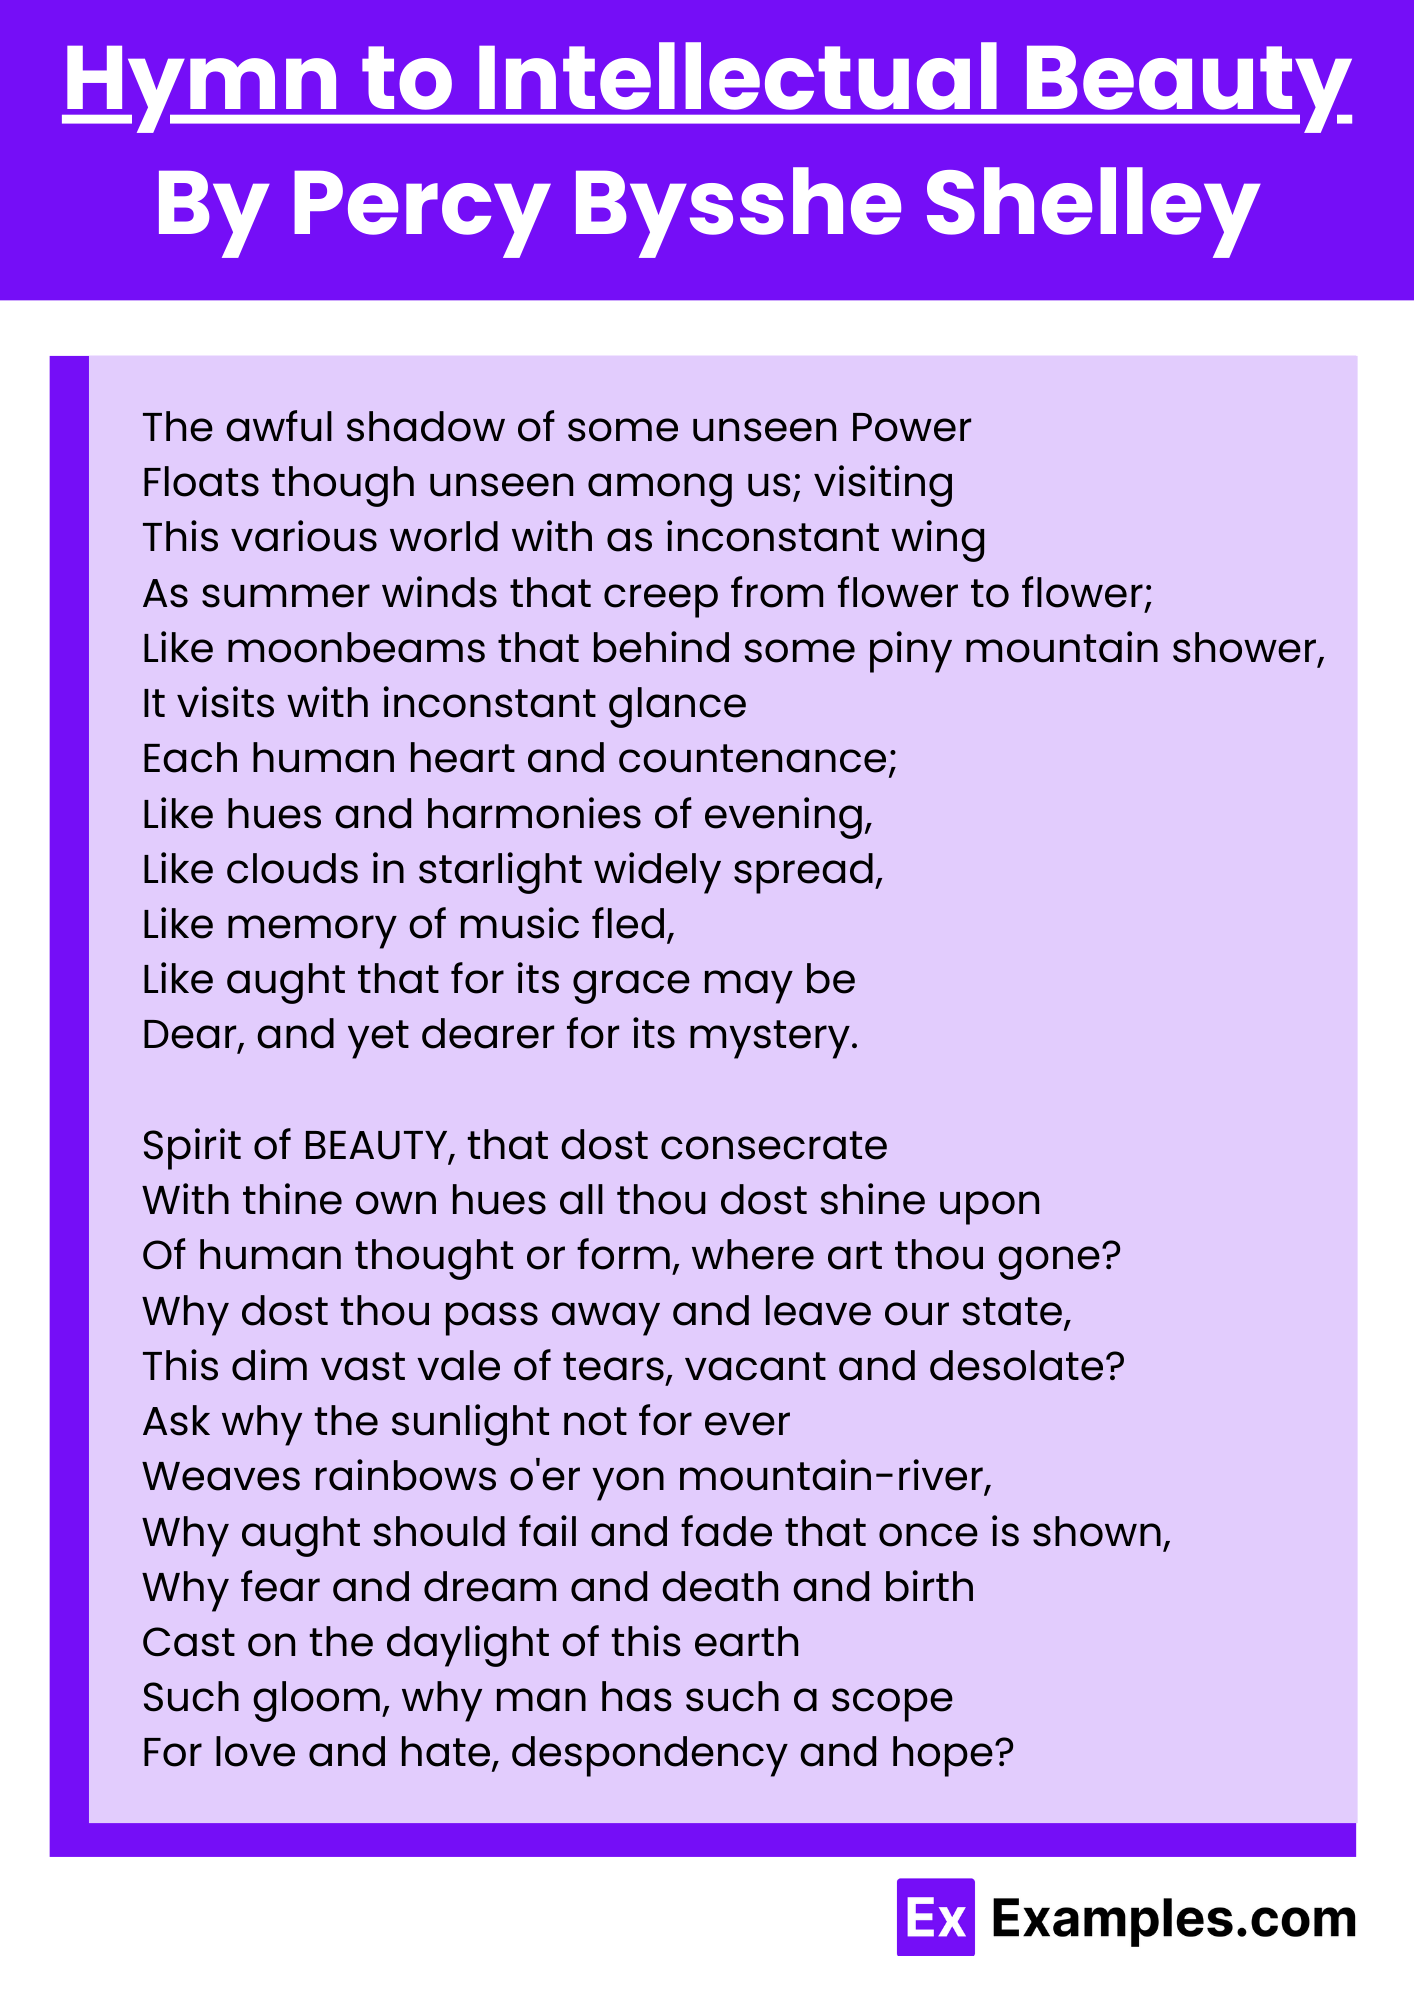 Hymn to Intellectual Beauty By Percy Bysshe Shelley